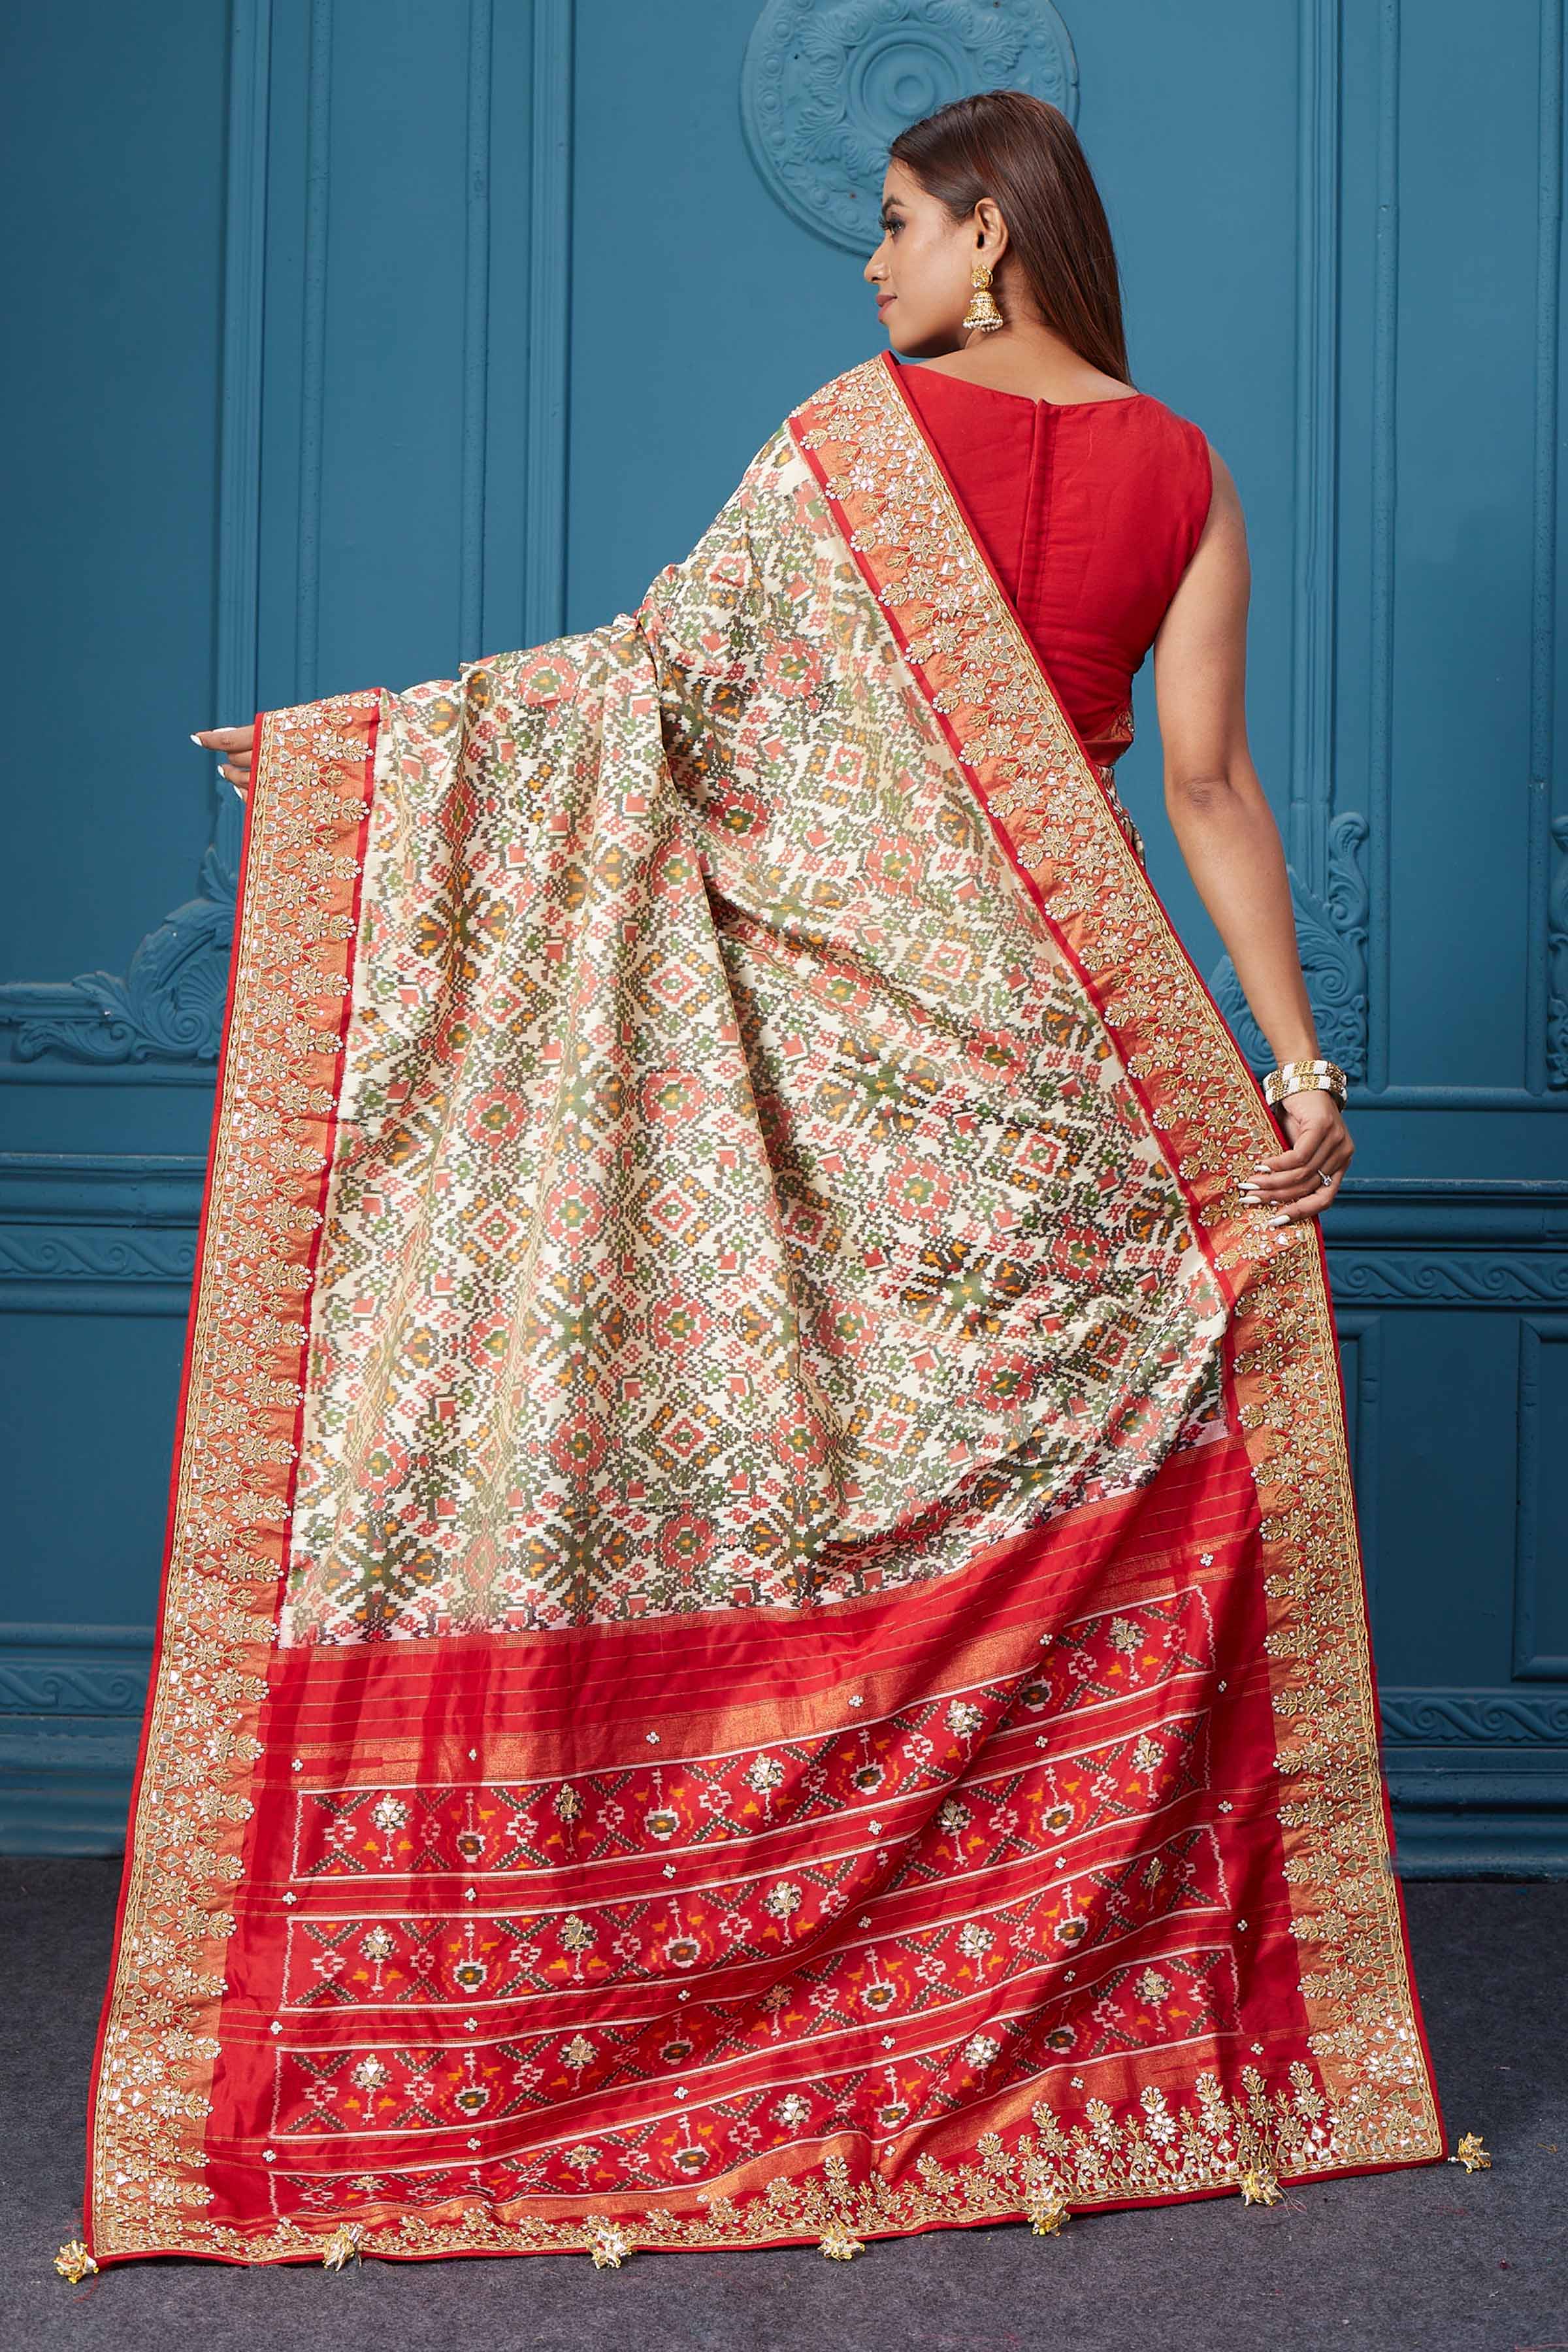 Buy off-white Patola silk saree online in USA with red embroidered border and saree blouse. Look royal at weddings and festive occasions in exquisite designer sarees, handwoven sarees, pure silk saris, Banarasi sarees, Kanchipuram silk sarees from Pure Elegance Indian saree store in USA. -back